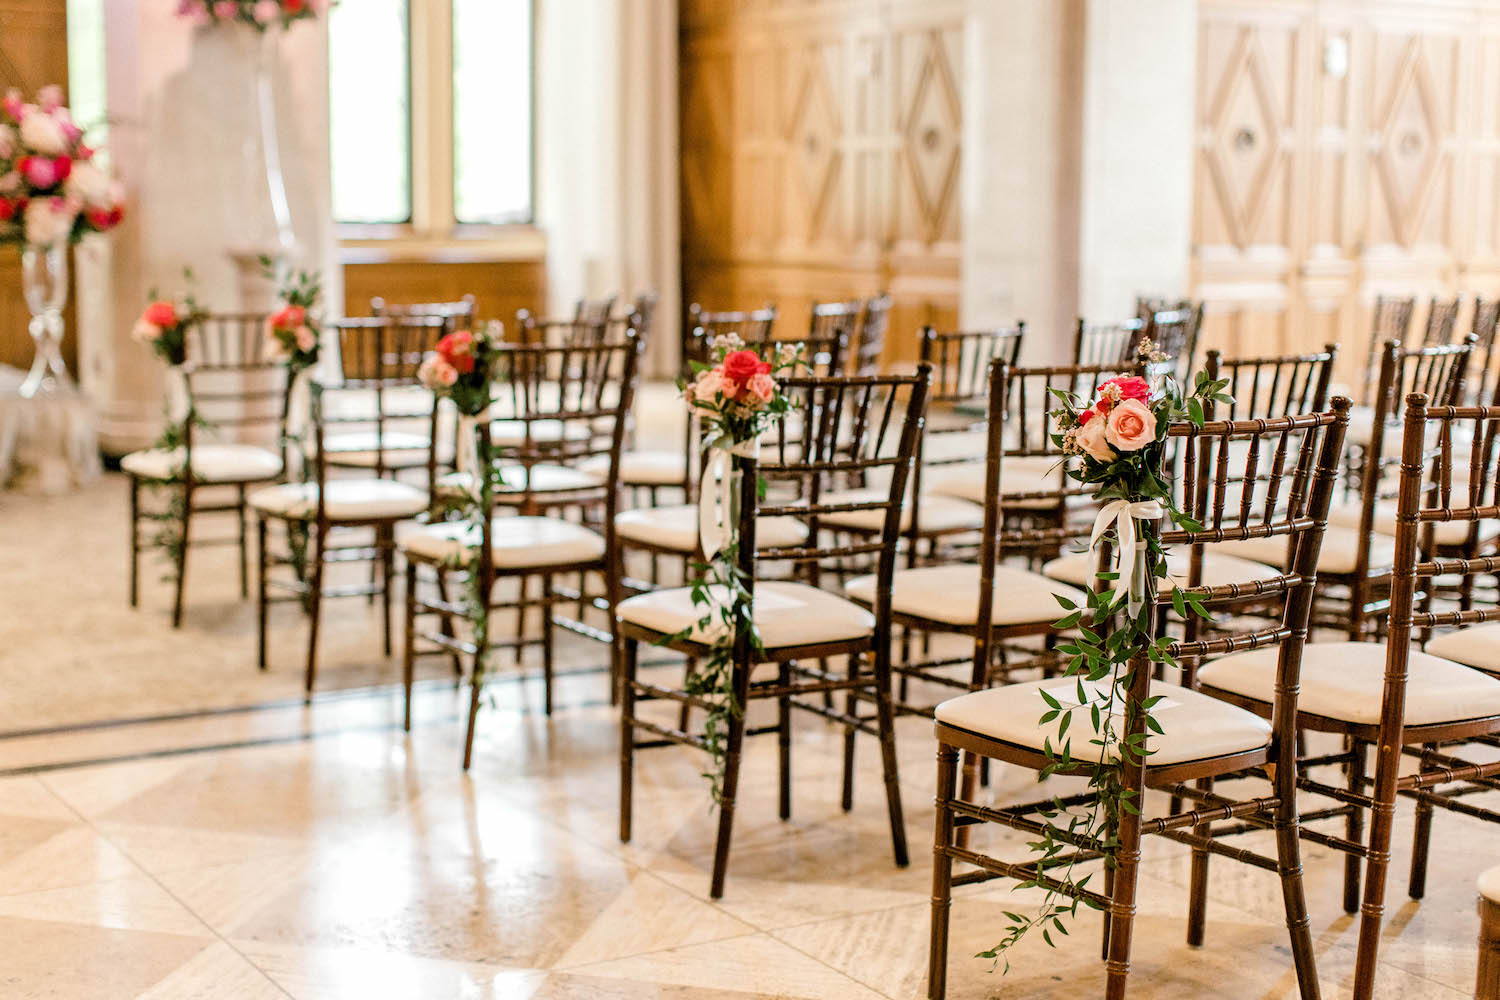 Floral design on aisle chairs